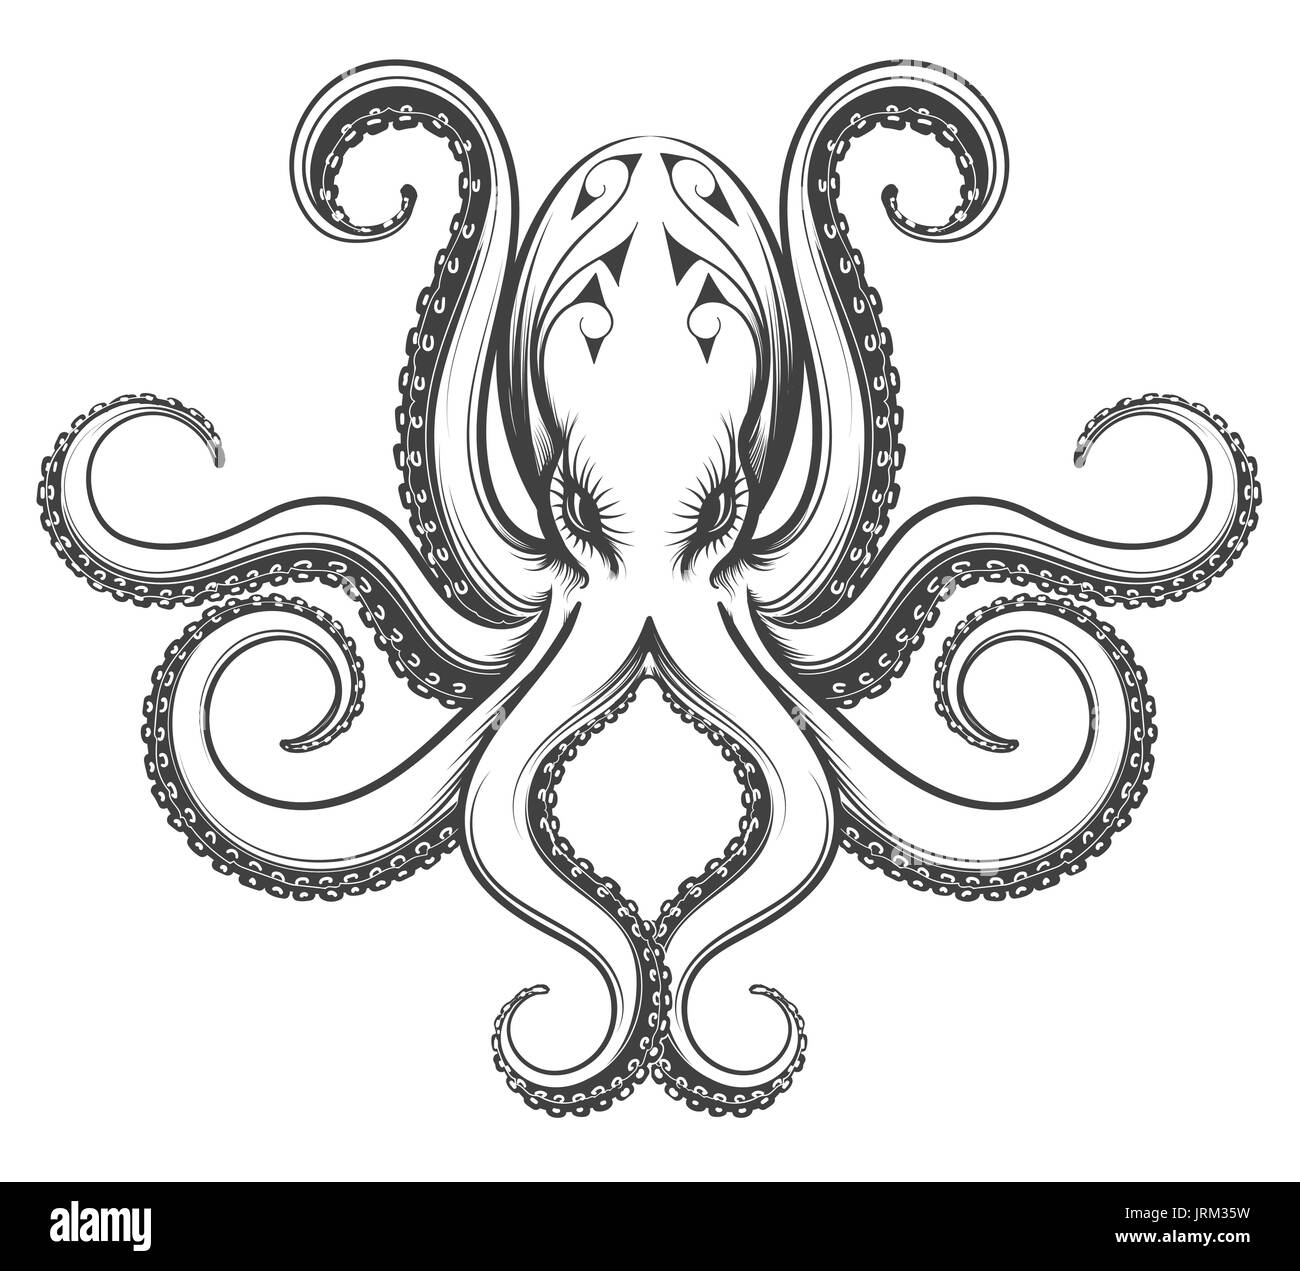 Octopus drawn in engraving vintage style. Vector illustration isolated on white background. Stock Vector